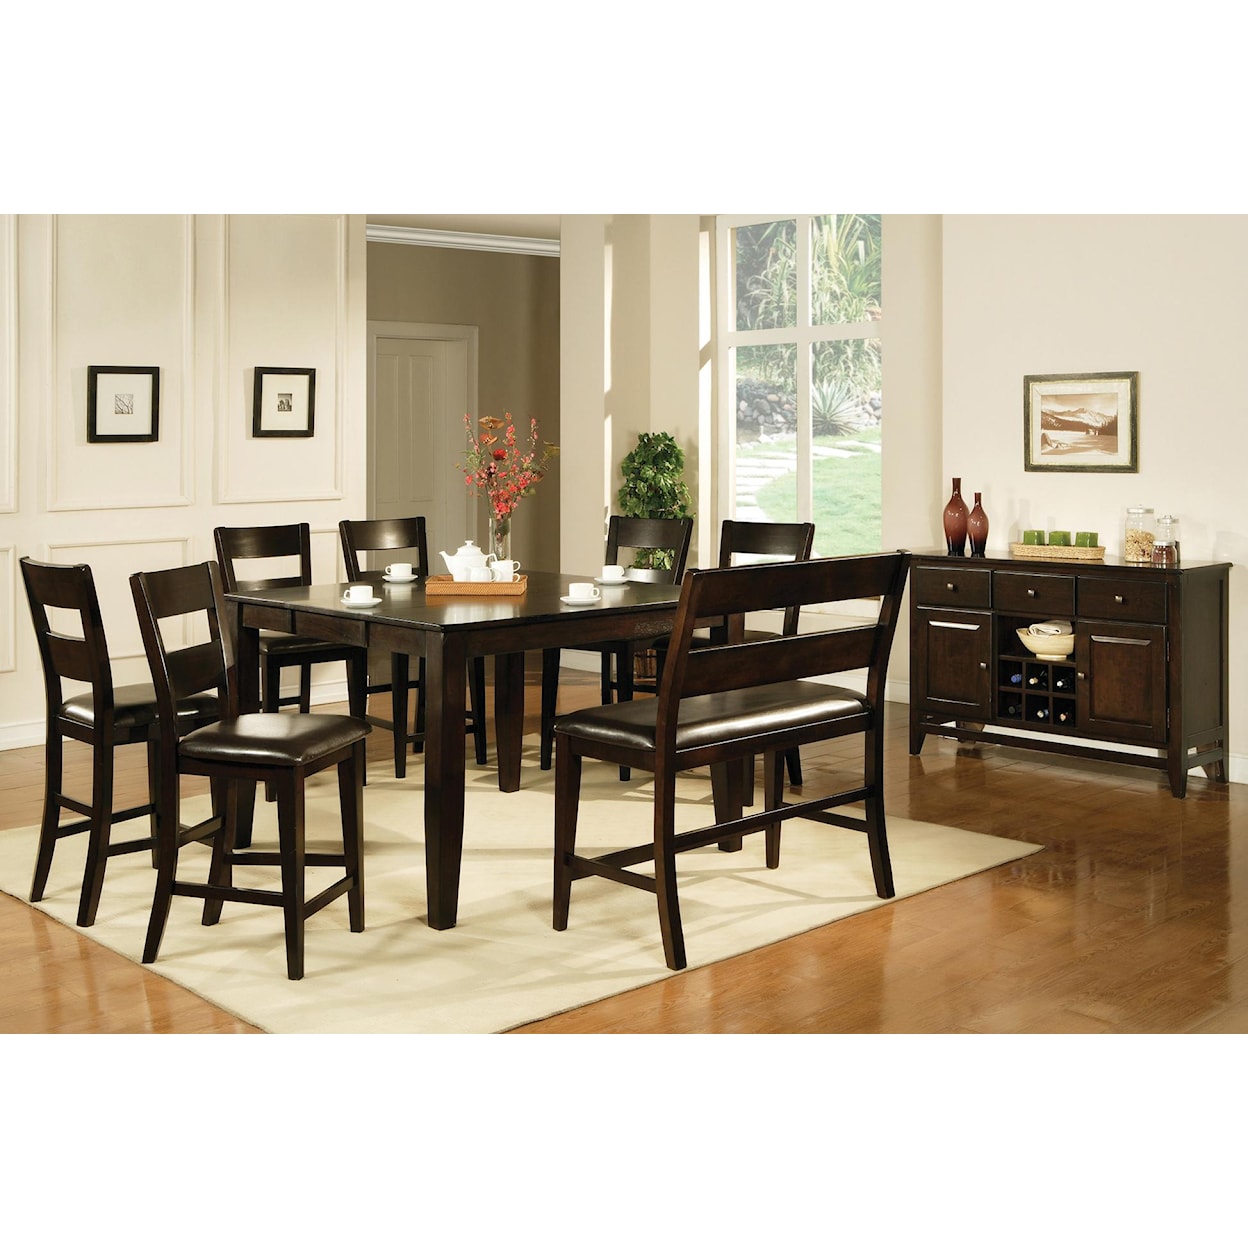 Prime Victoria  Formal Dining Room Group